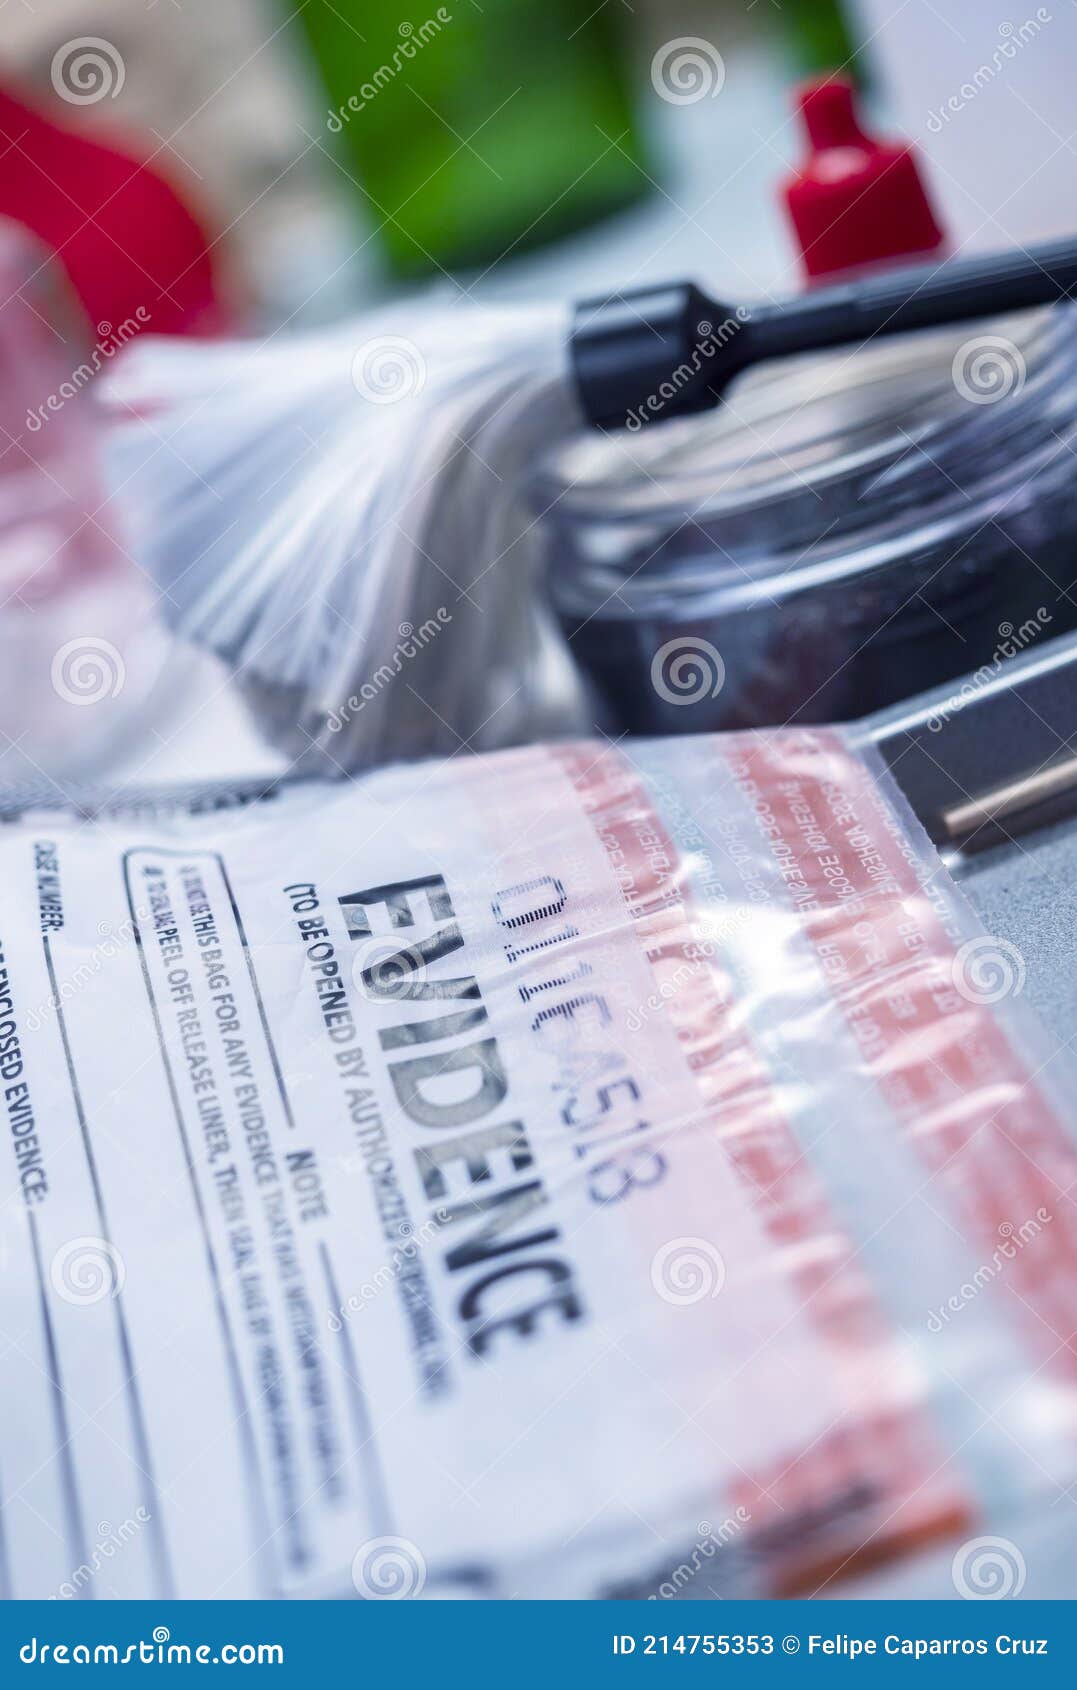 basic research utensilios with a evidence bag in laboratorio forensic equipment